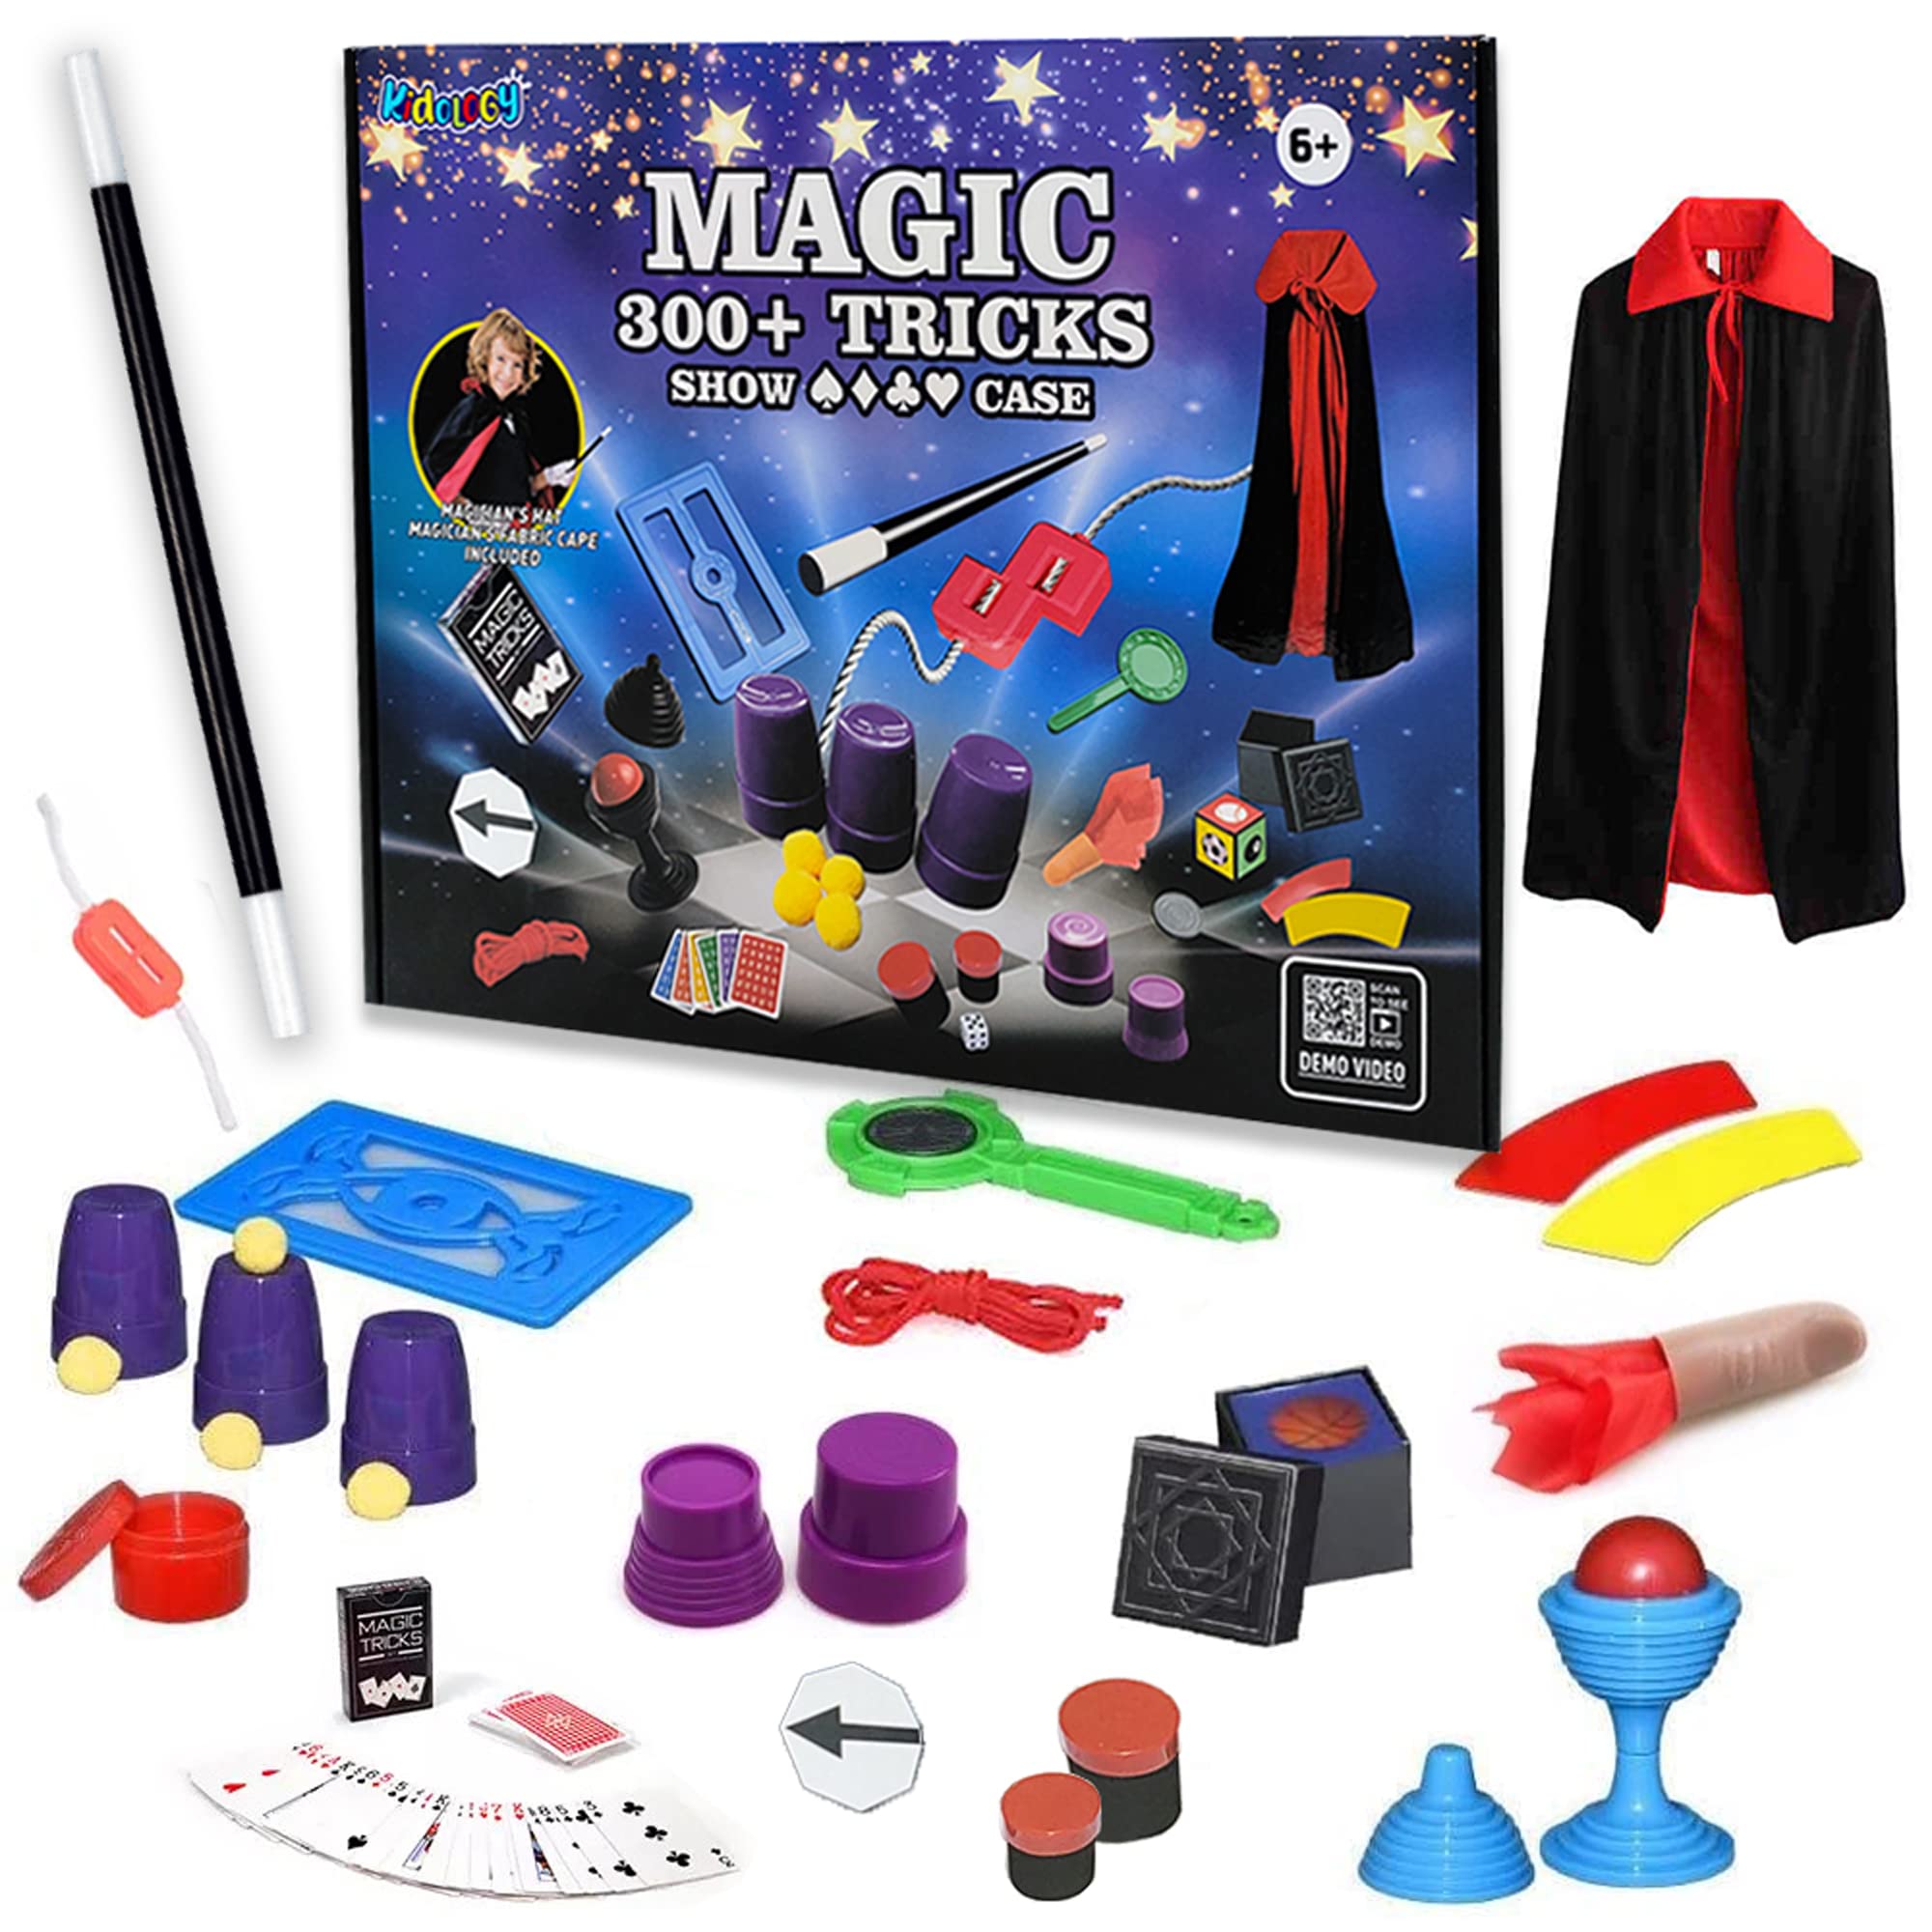 Magic Trick Set for Ages 6-14,Spectacular Magic with 300+Mind-Blowing Magic Tricks&Complete Role Play Set-Ideal for Beginners Exclusive Box with Magical Costume&Wand for Kids,Multi